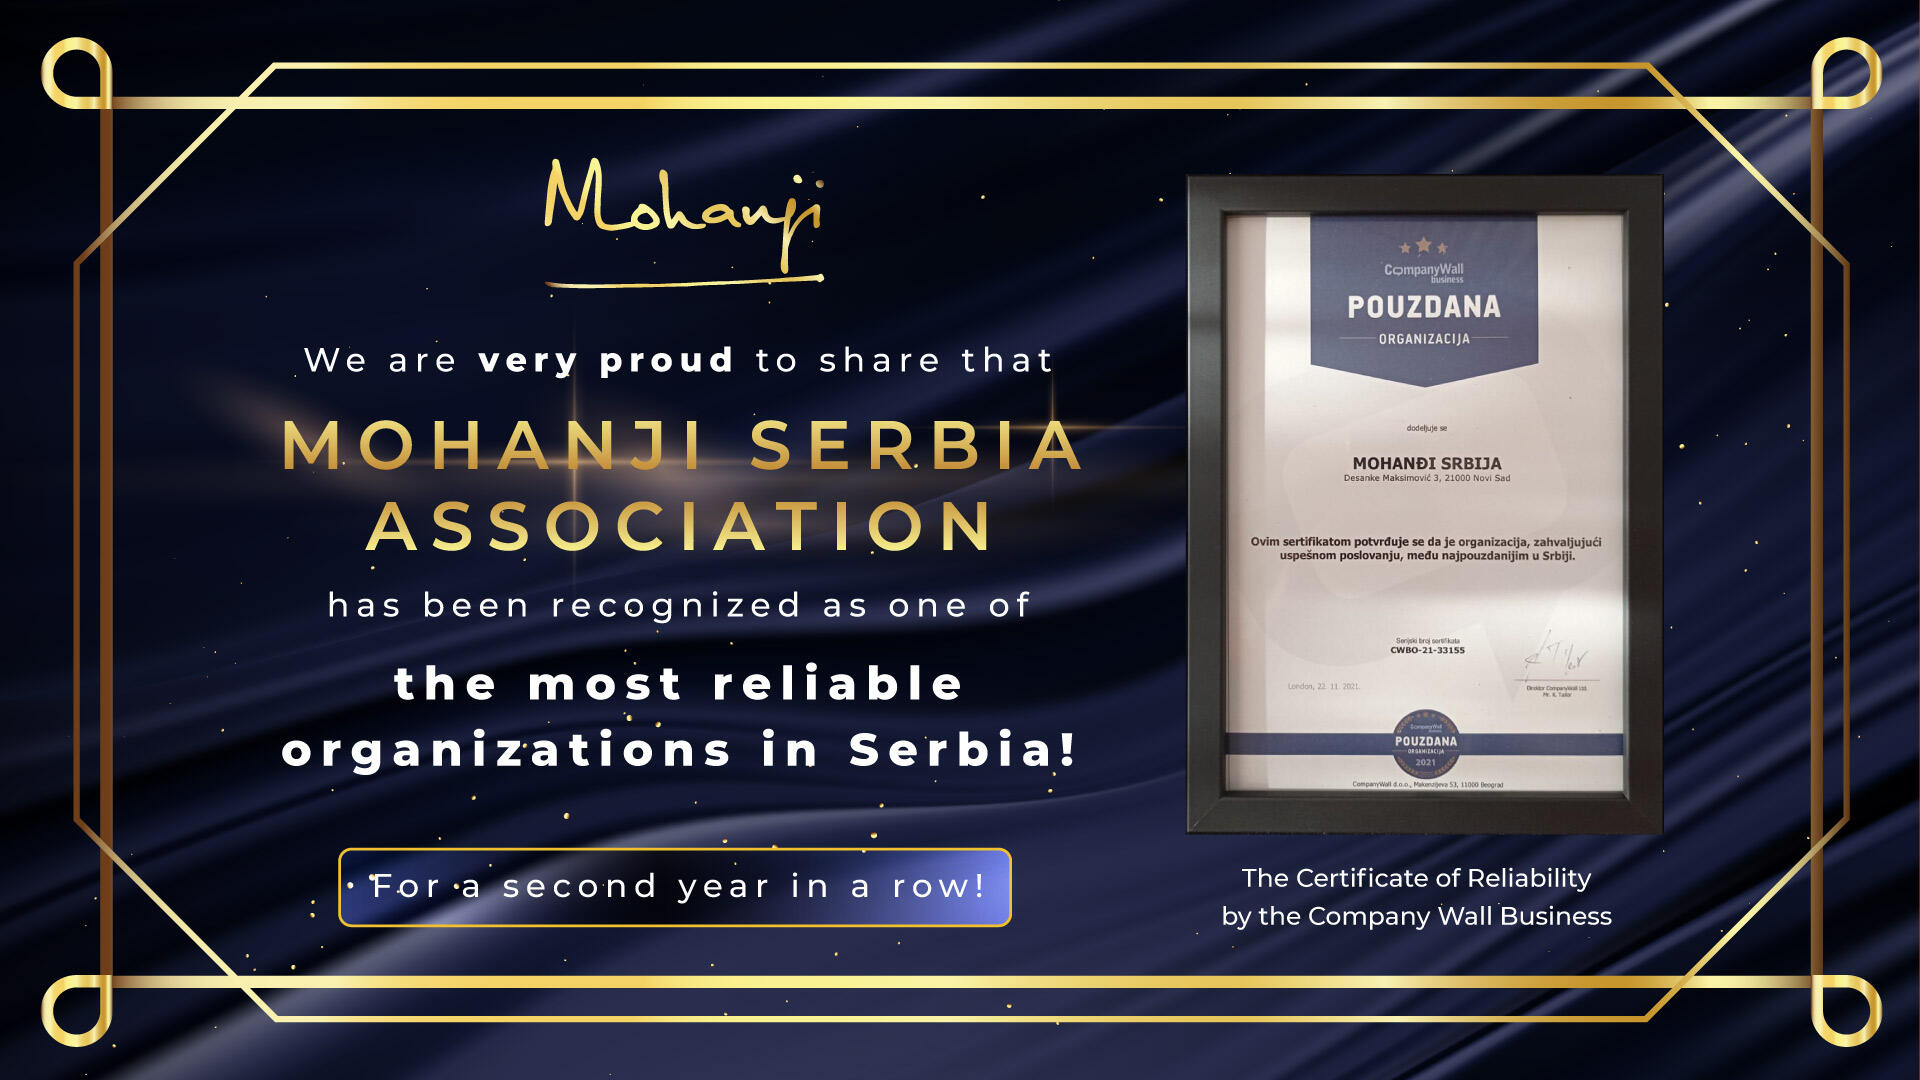 Mohanji Serbia Association – Recognised as one of the most reliable organisations in Serbia